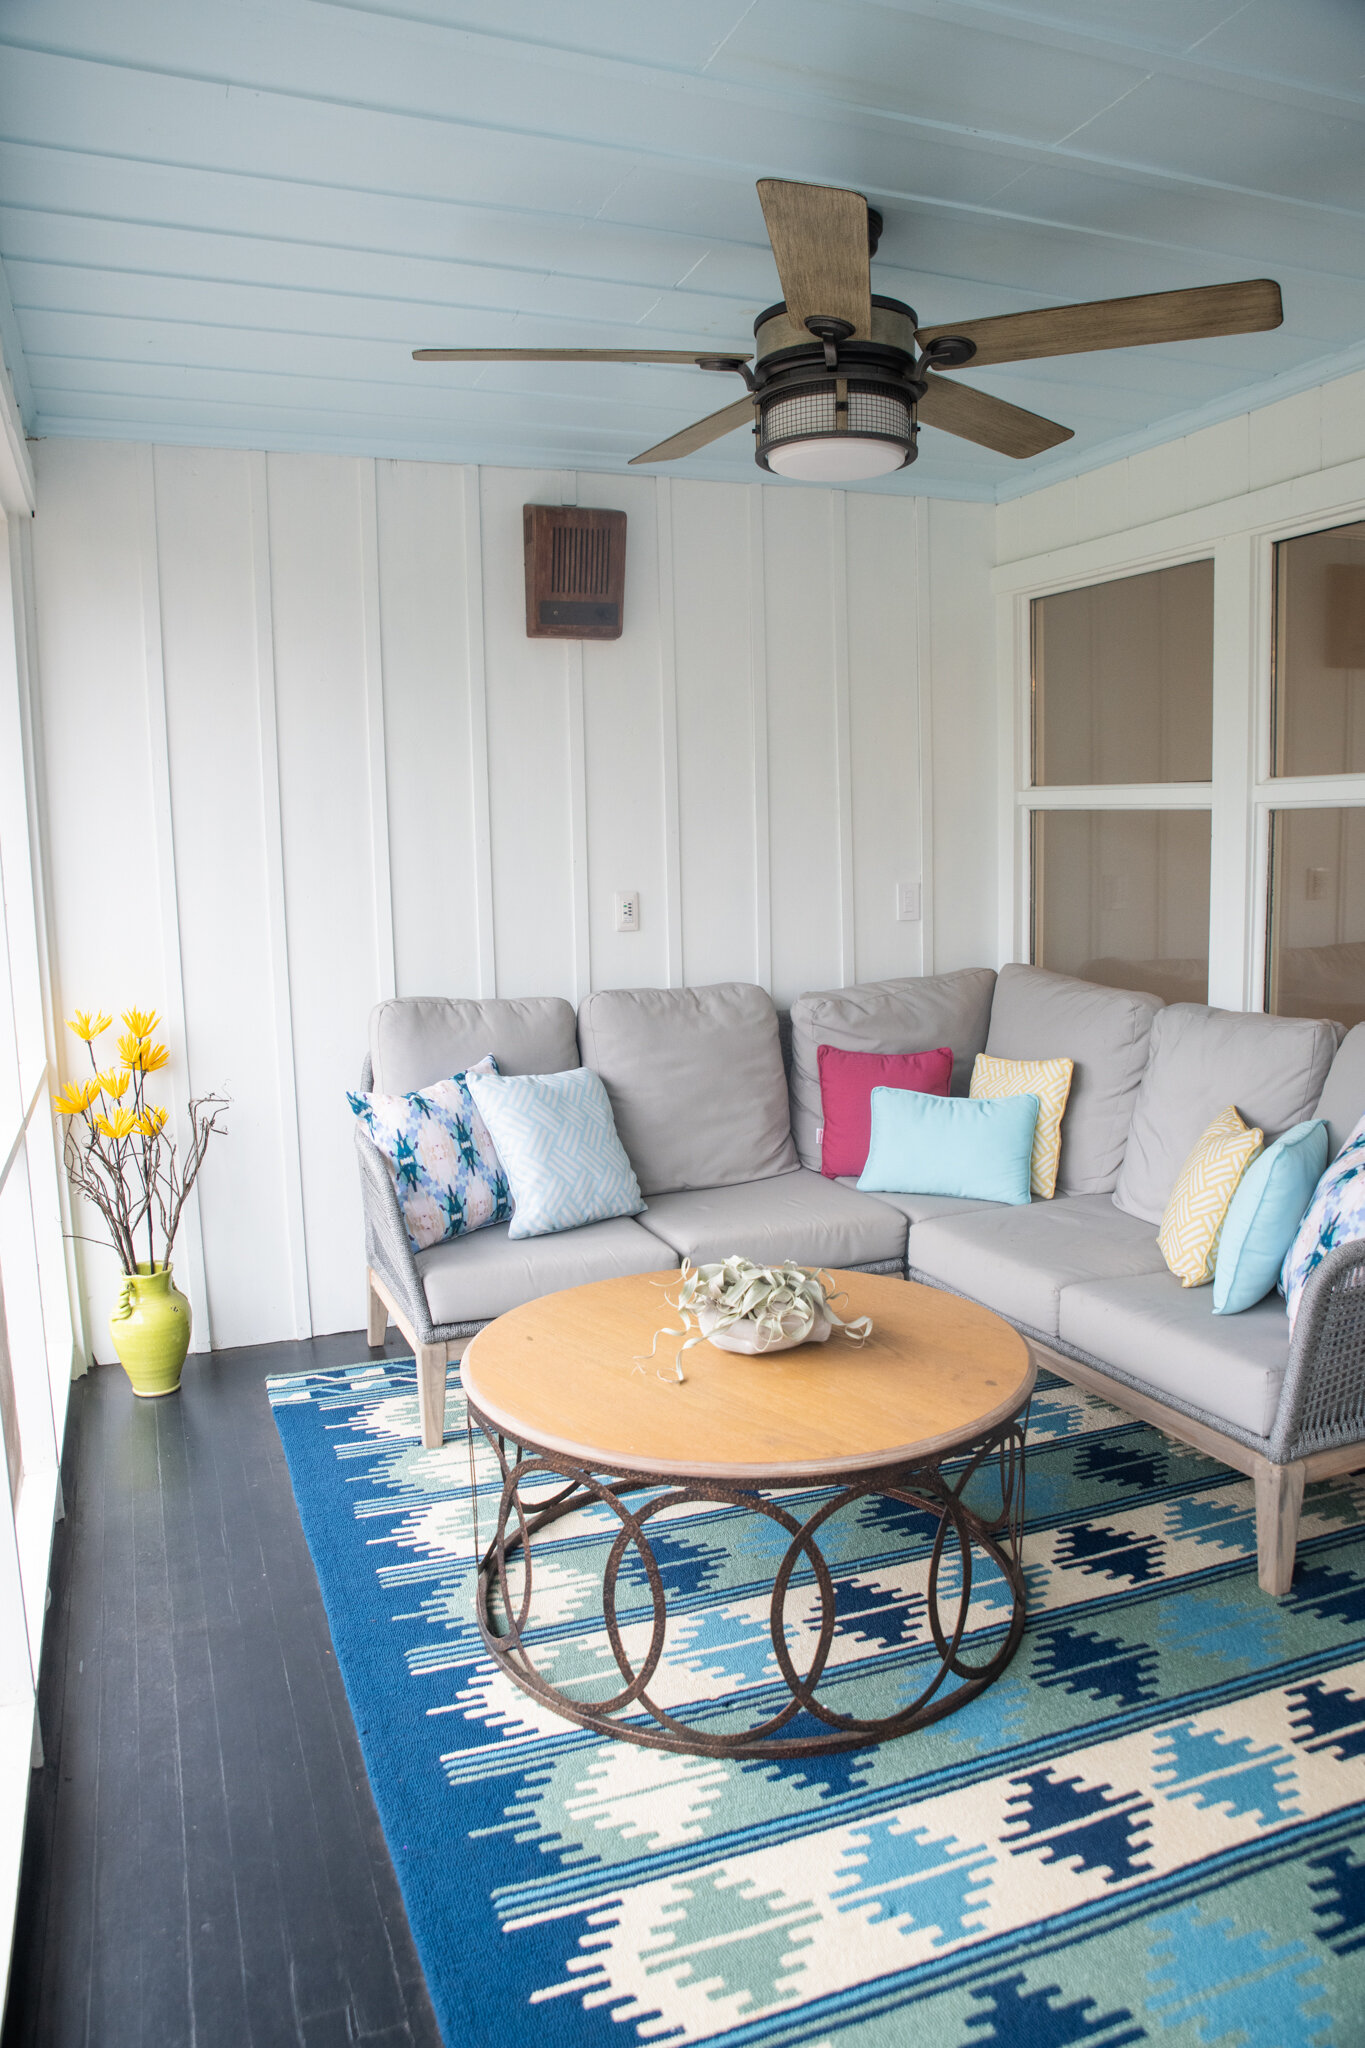 Dwell-Chic-Colorful-Coastal-Porch-Outdoor-Sitting-Area.jpg